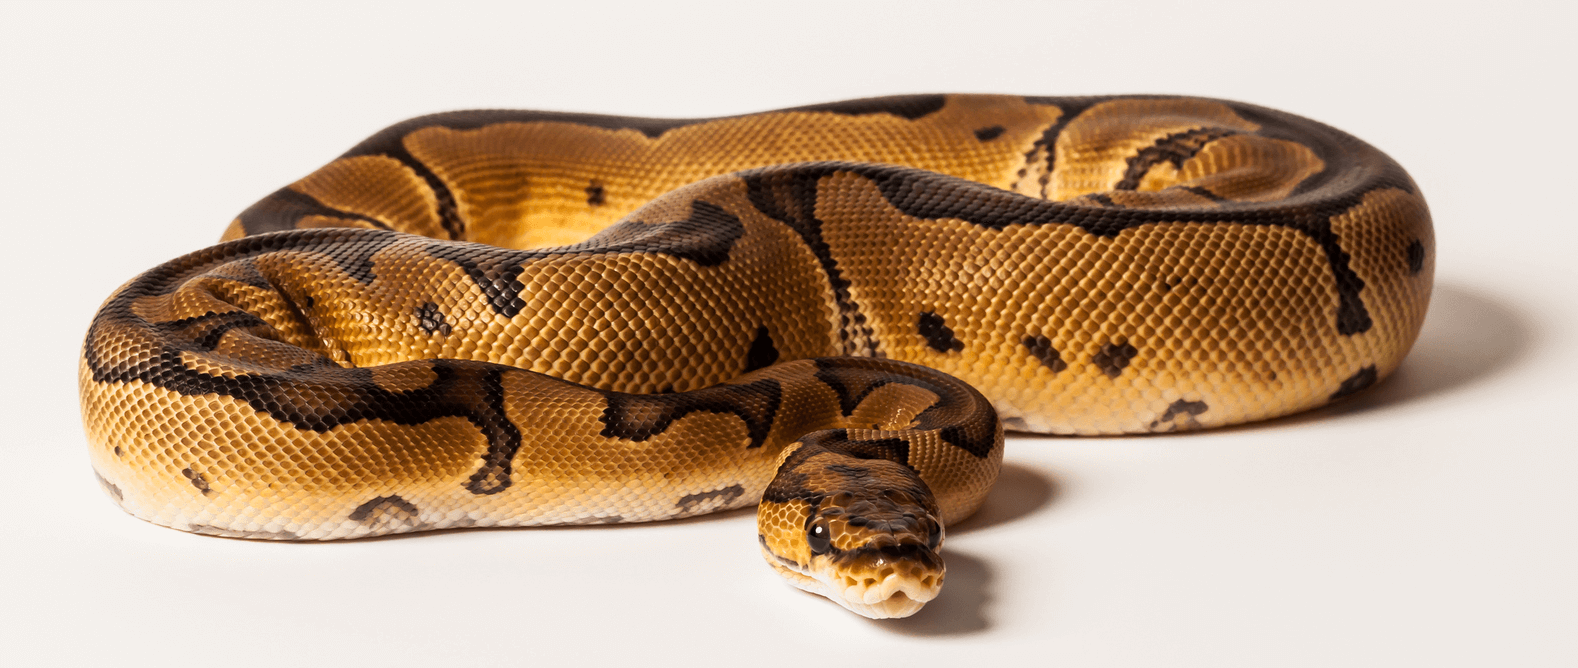 Spider Ball Pythons:An Introduction and Care Guide